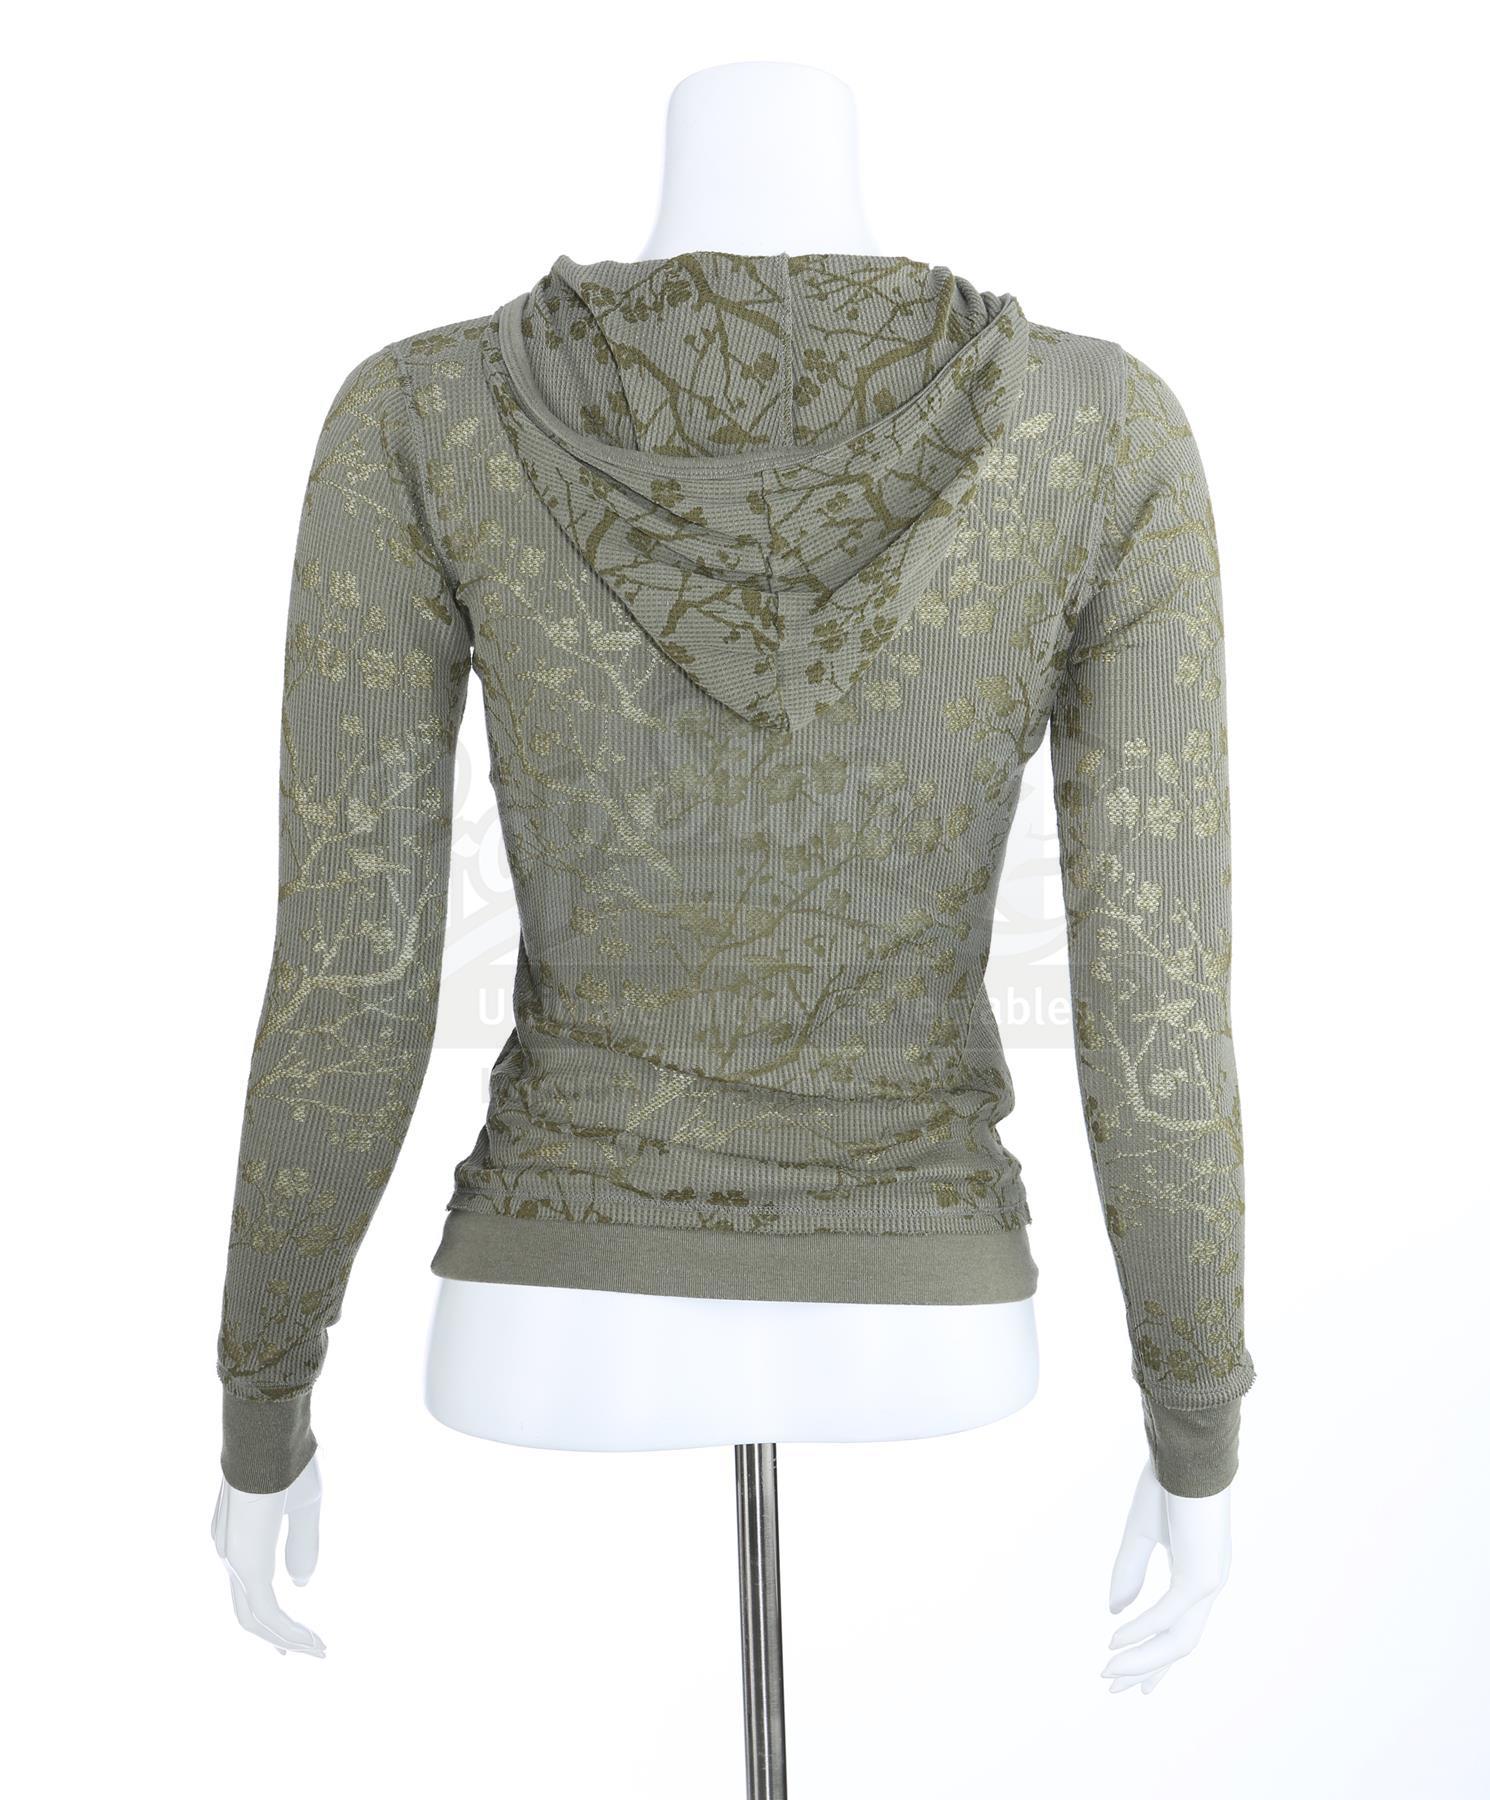 TWILIGHT (2008) - Bella Swan's Green Hooded Thermal - Current price: $1100